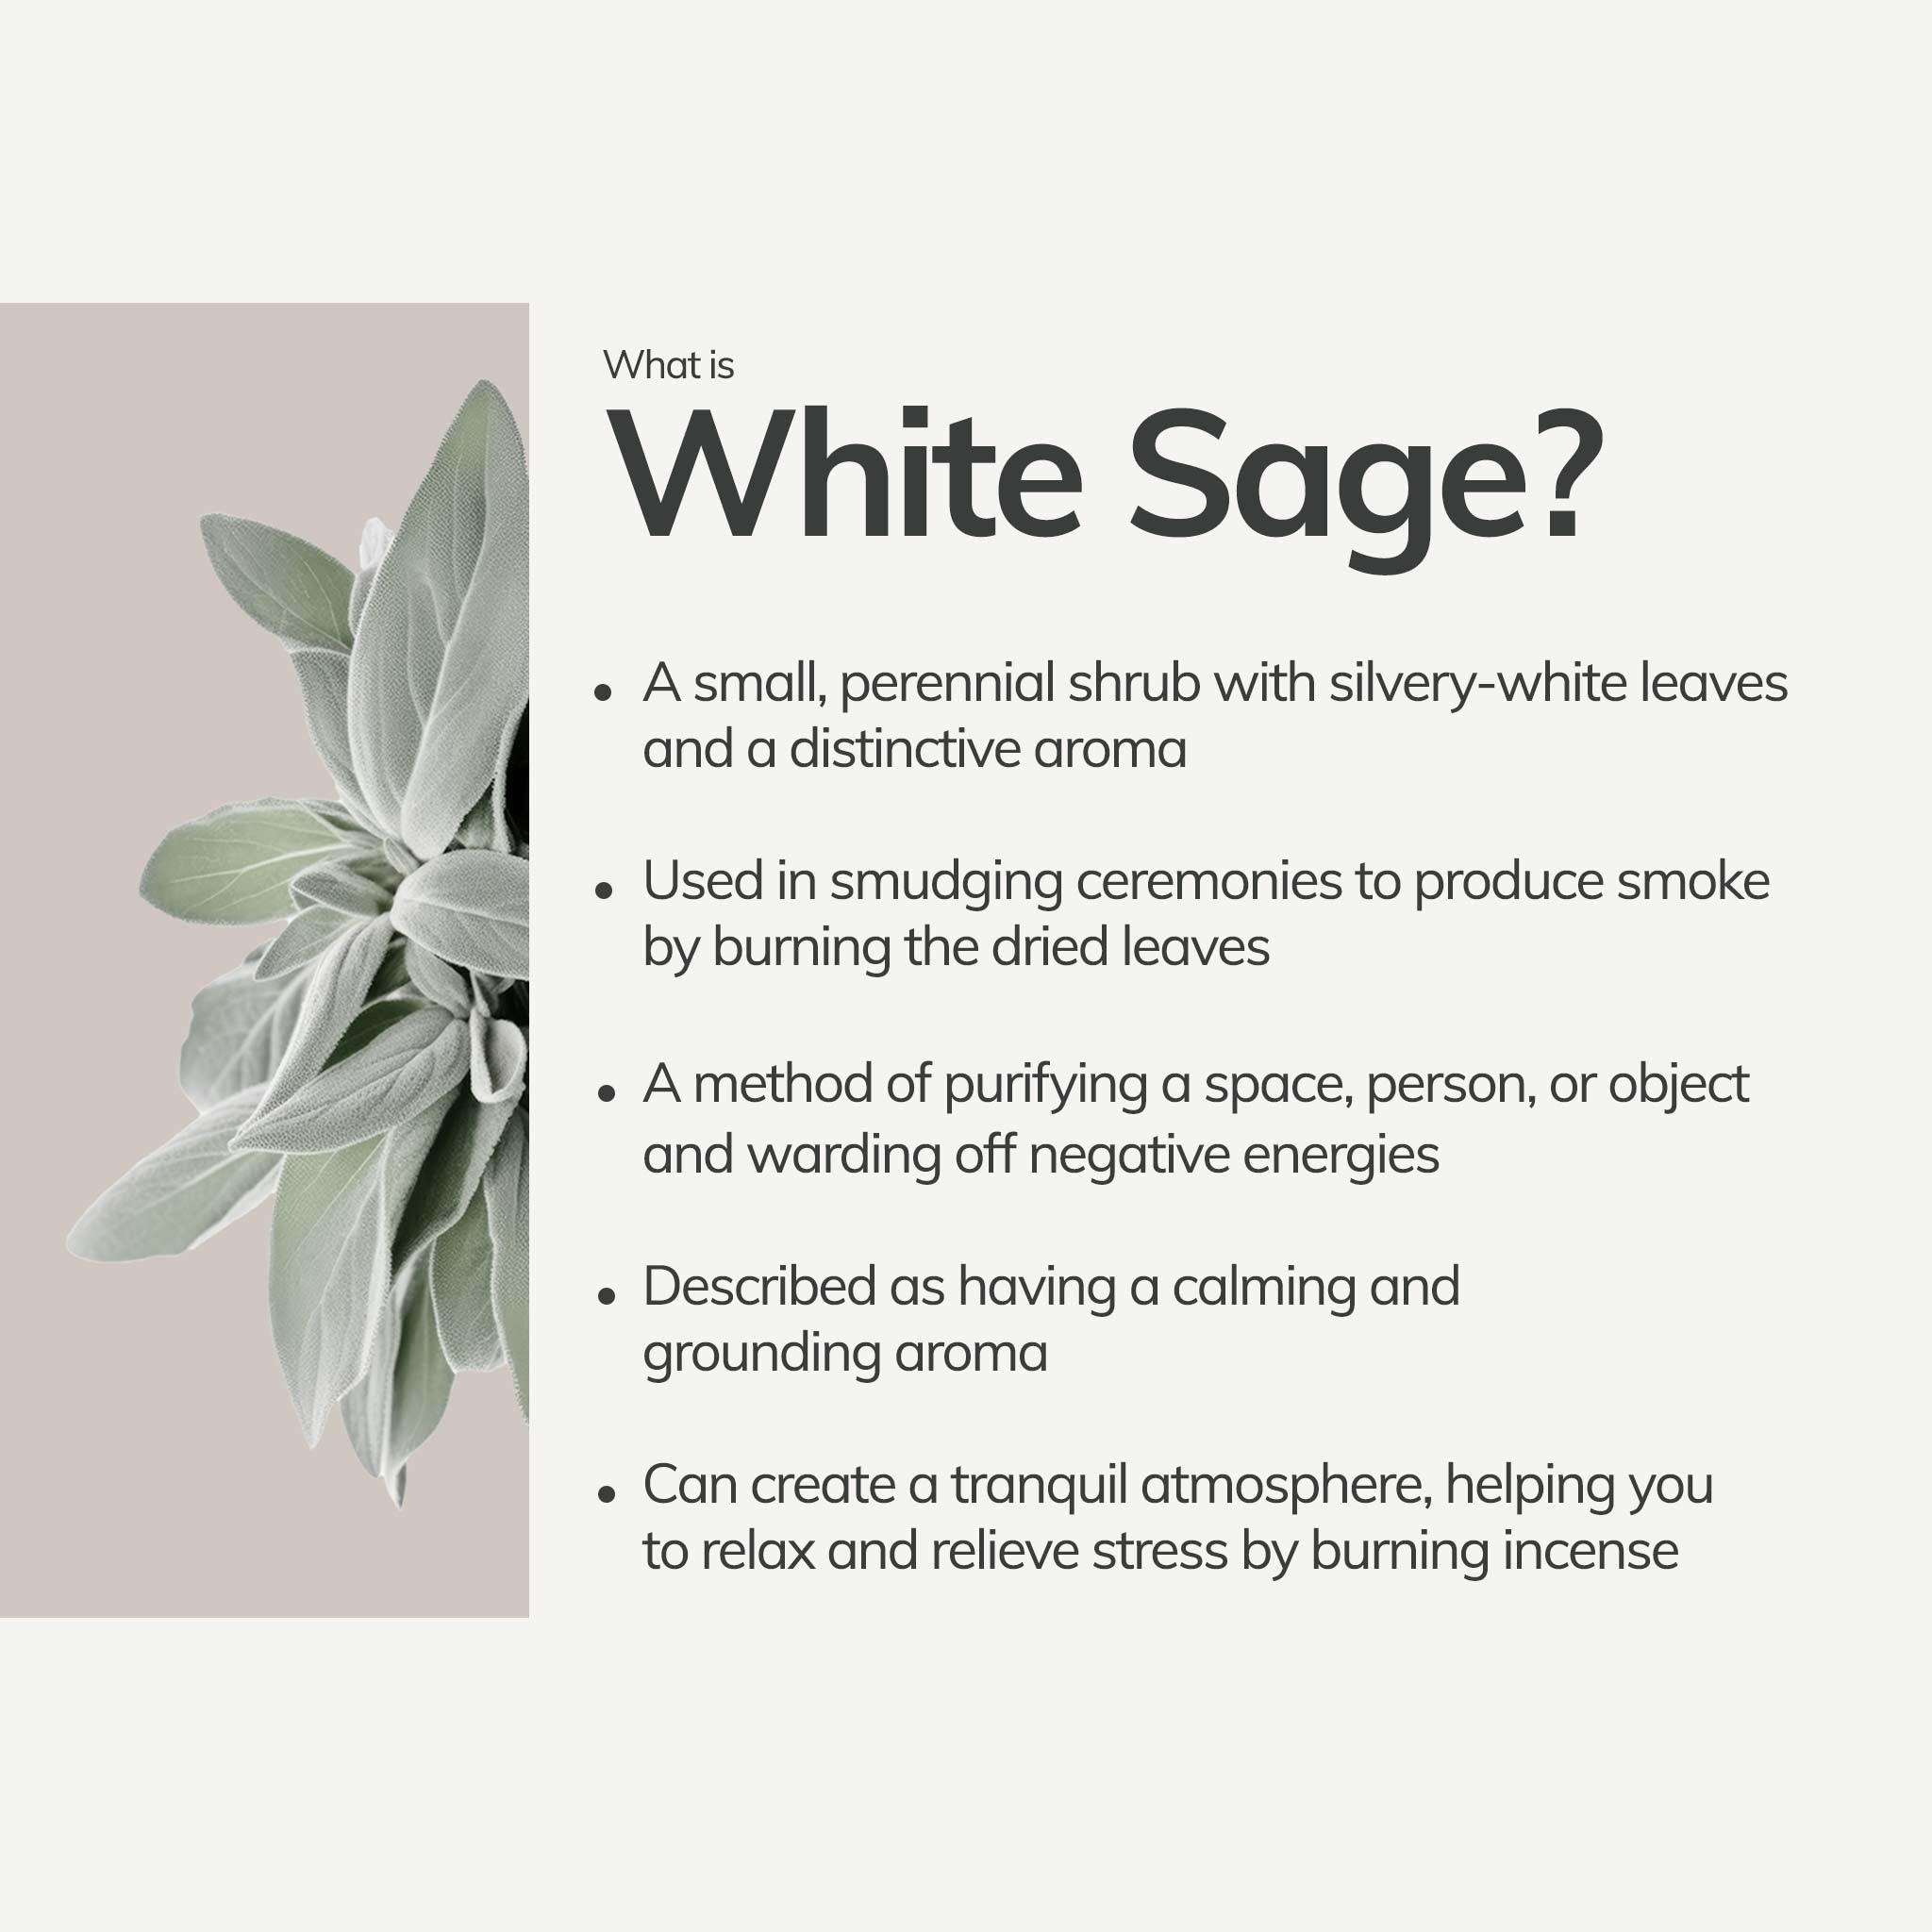 Left: White Sage Leaves; Right: Bullet list about what is white sage used for.